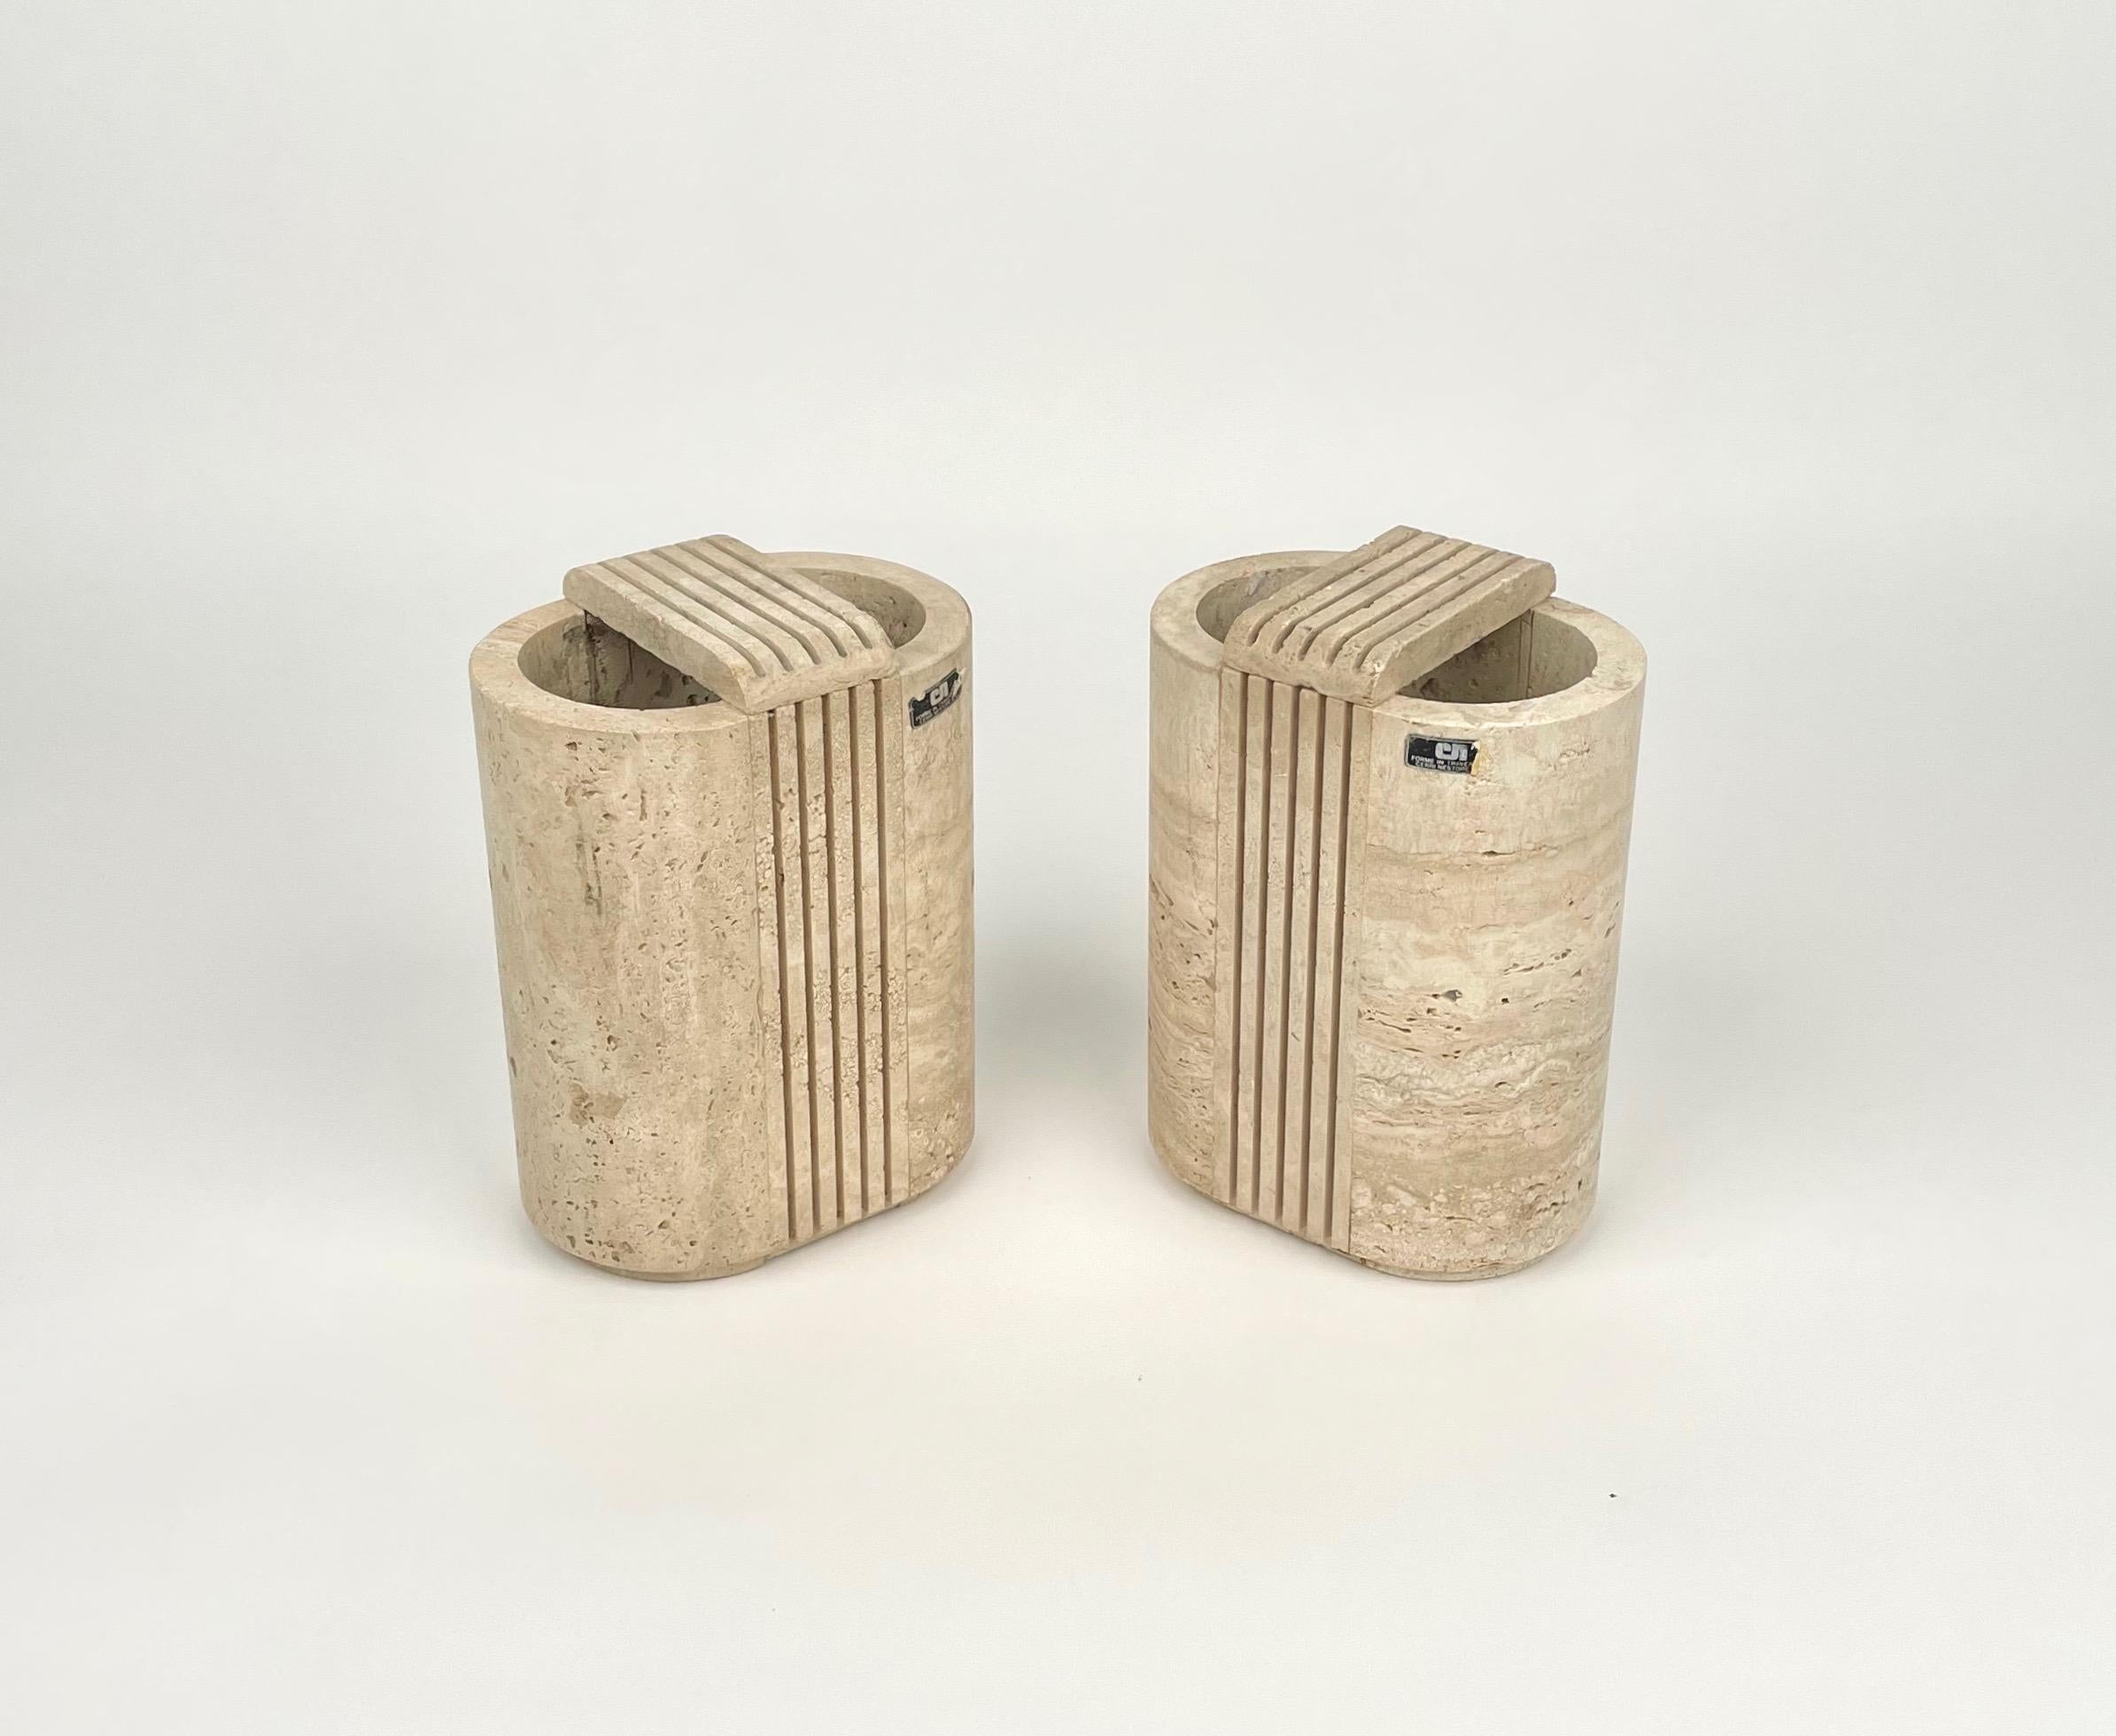 Pair of travertine marble vases by the Italian designer Cerri Nestore. Made in Italy in the 1970s. 

The original labels are still attached on the vases, as show in the pictures.